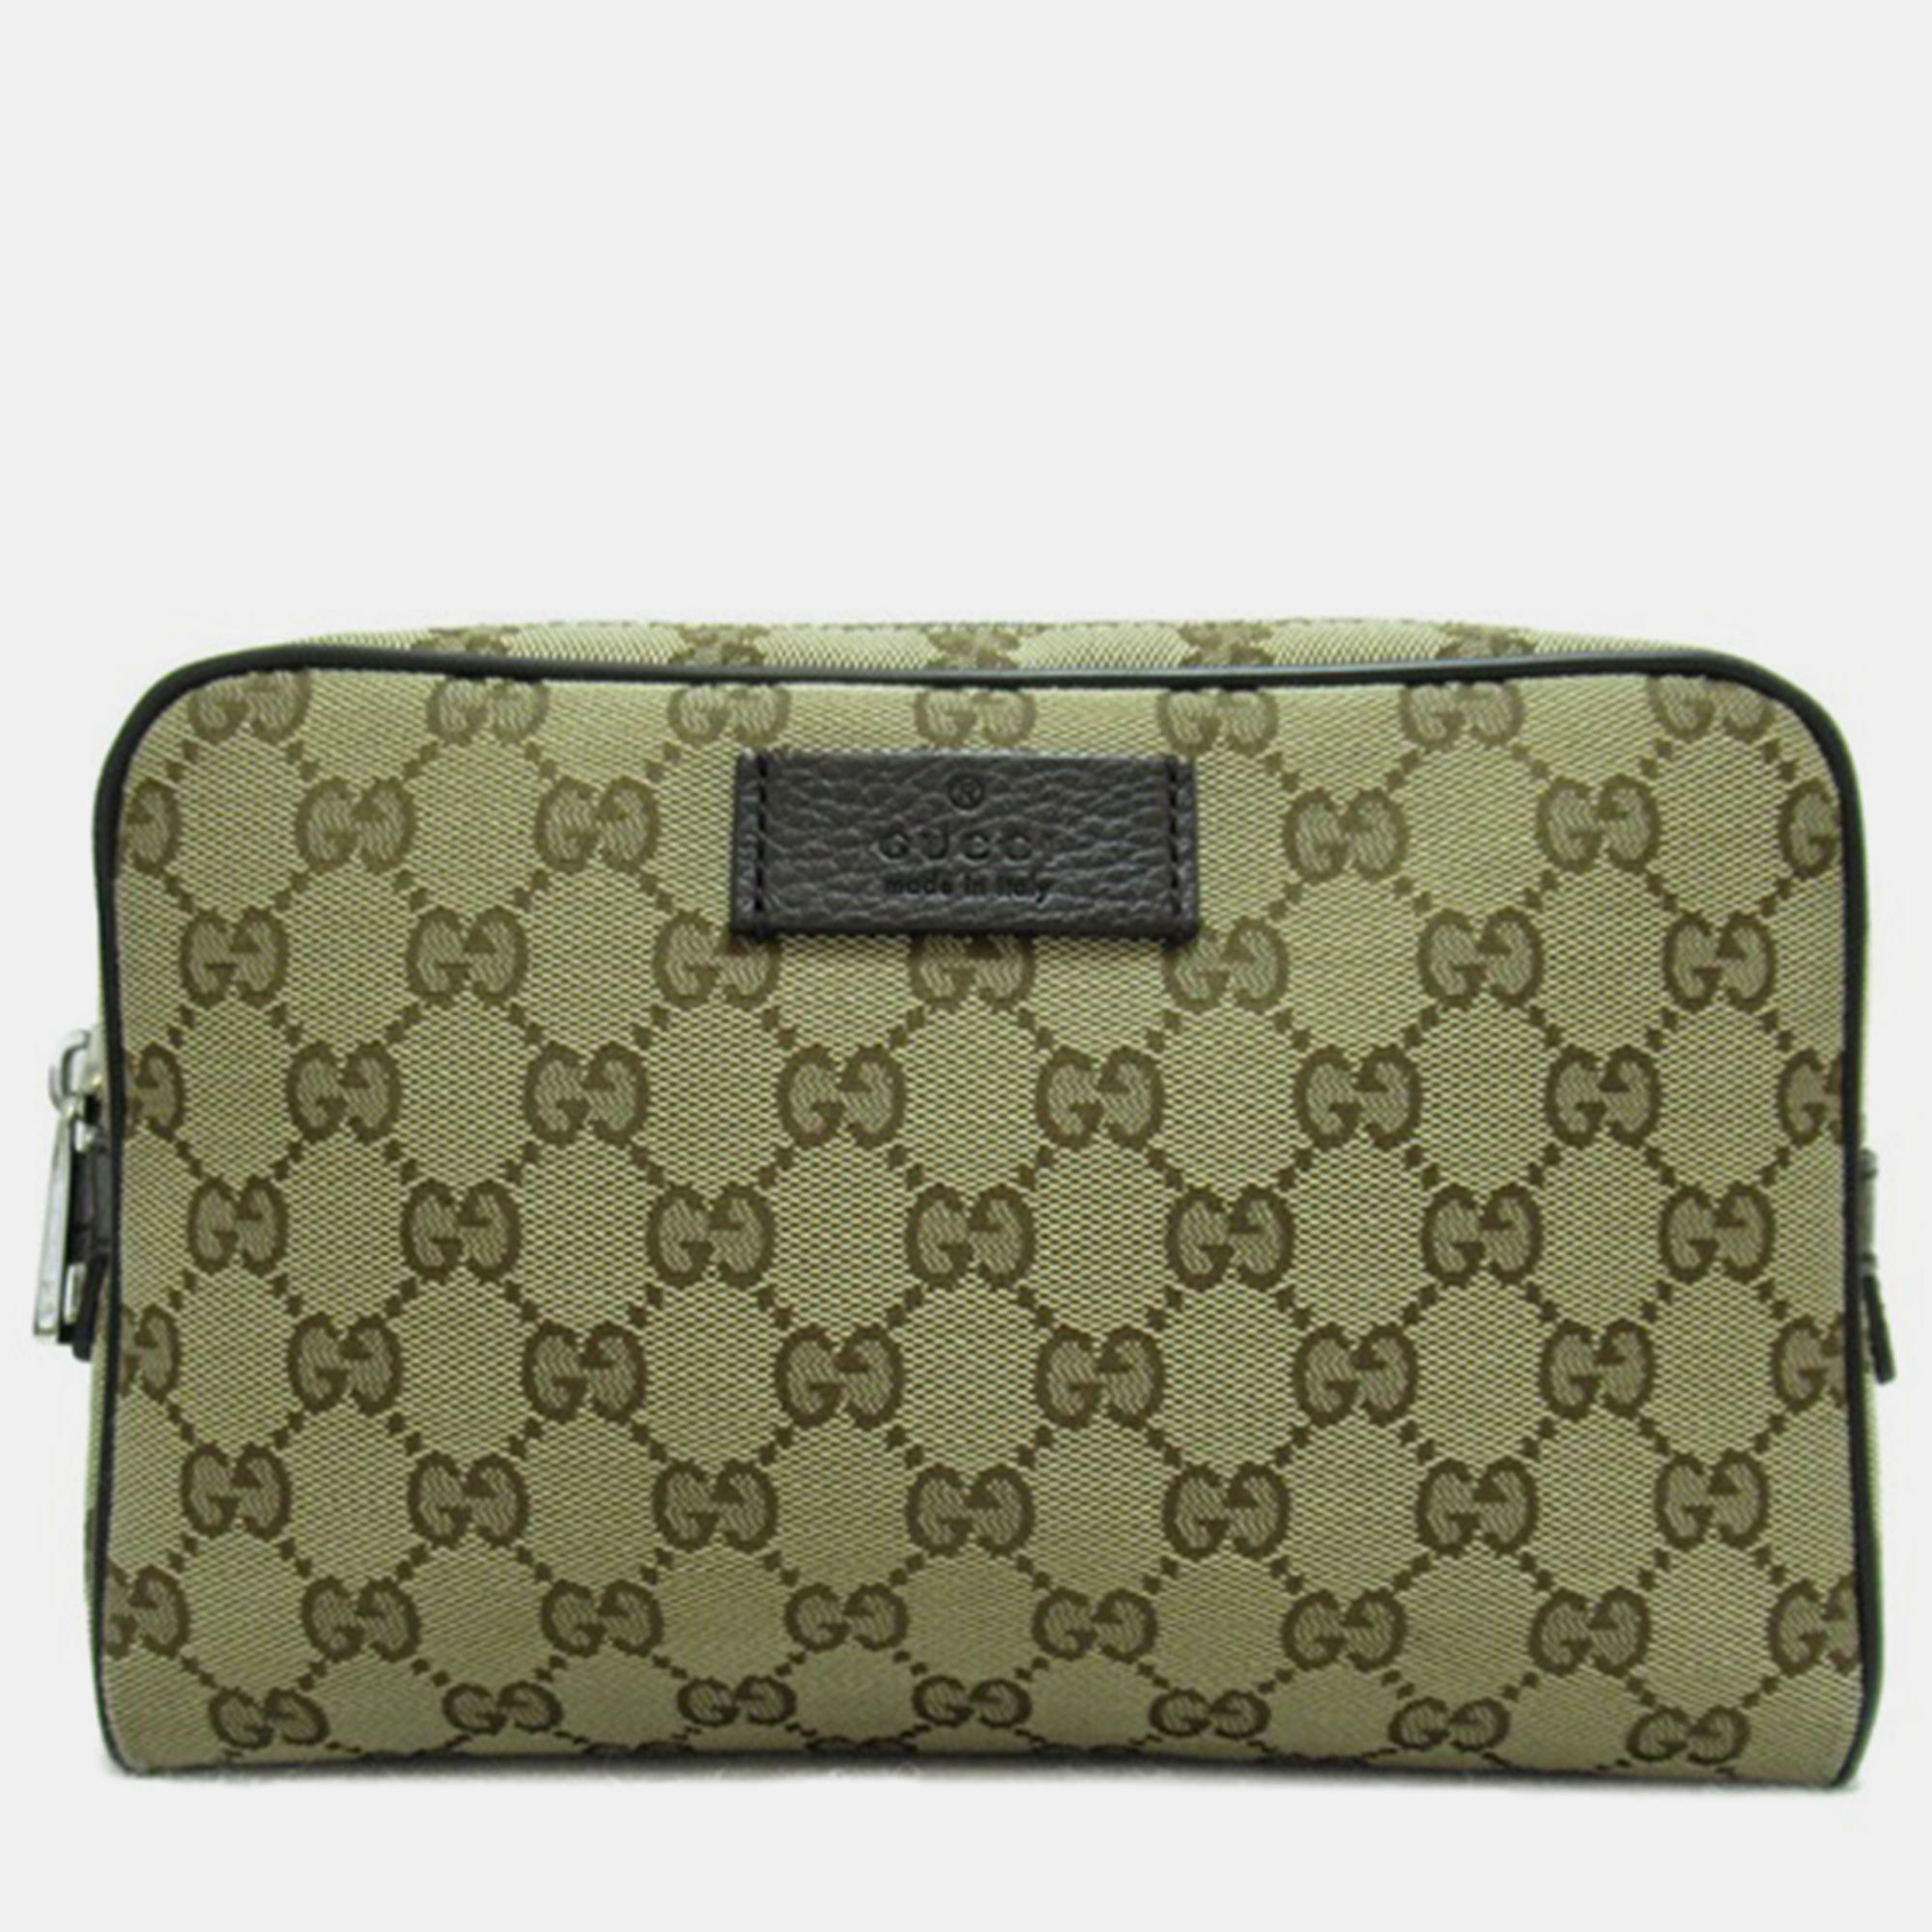 Gucci Beige/Brown GG Canvas And Leather Waist Bag